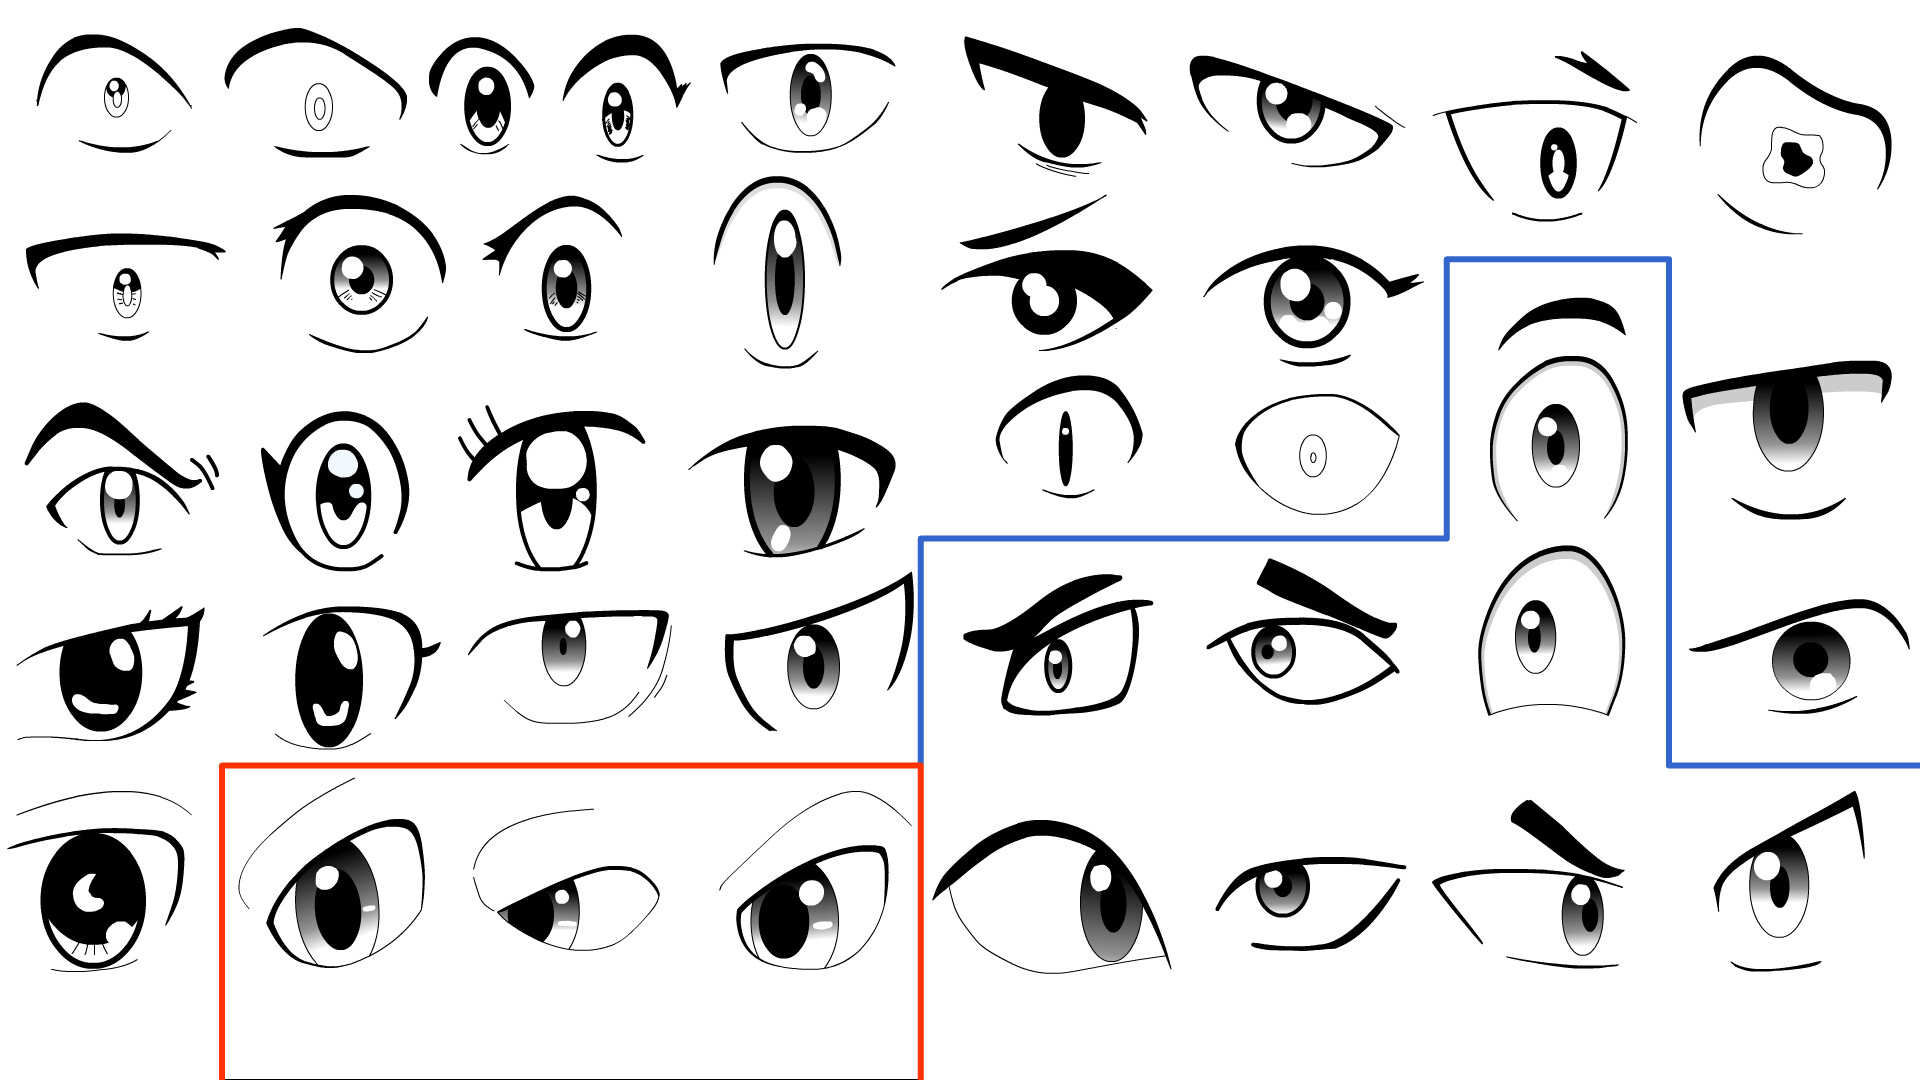 The comprehensive reference for drawing anime eyes. #anime